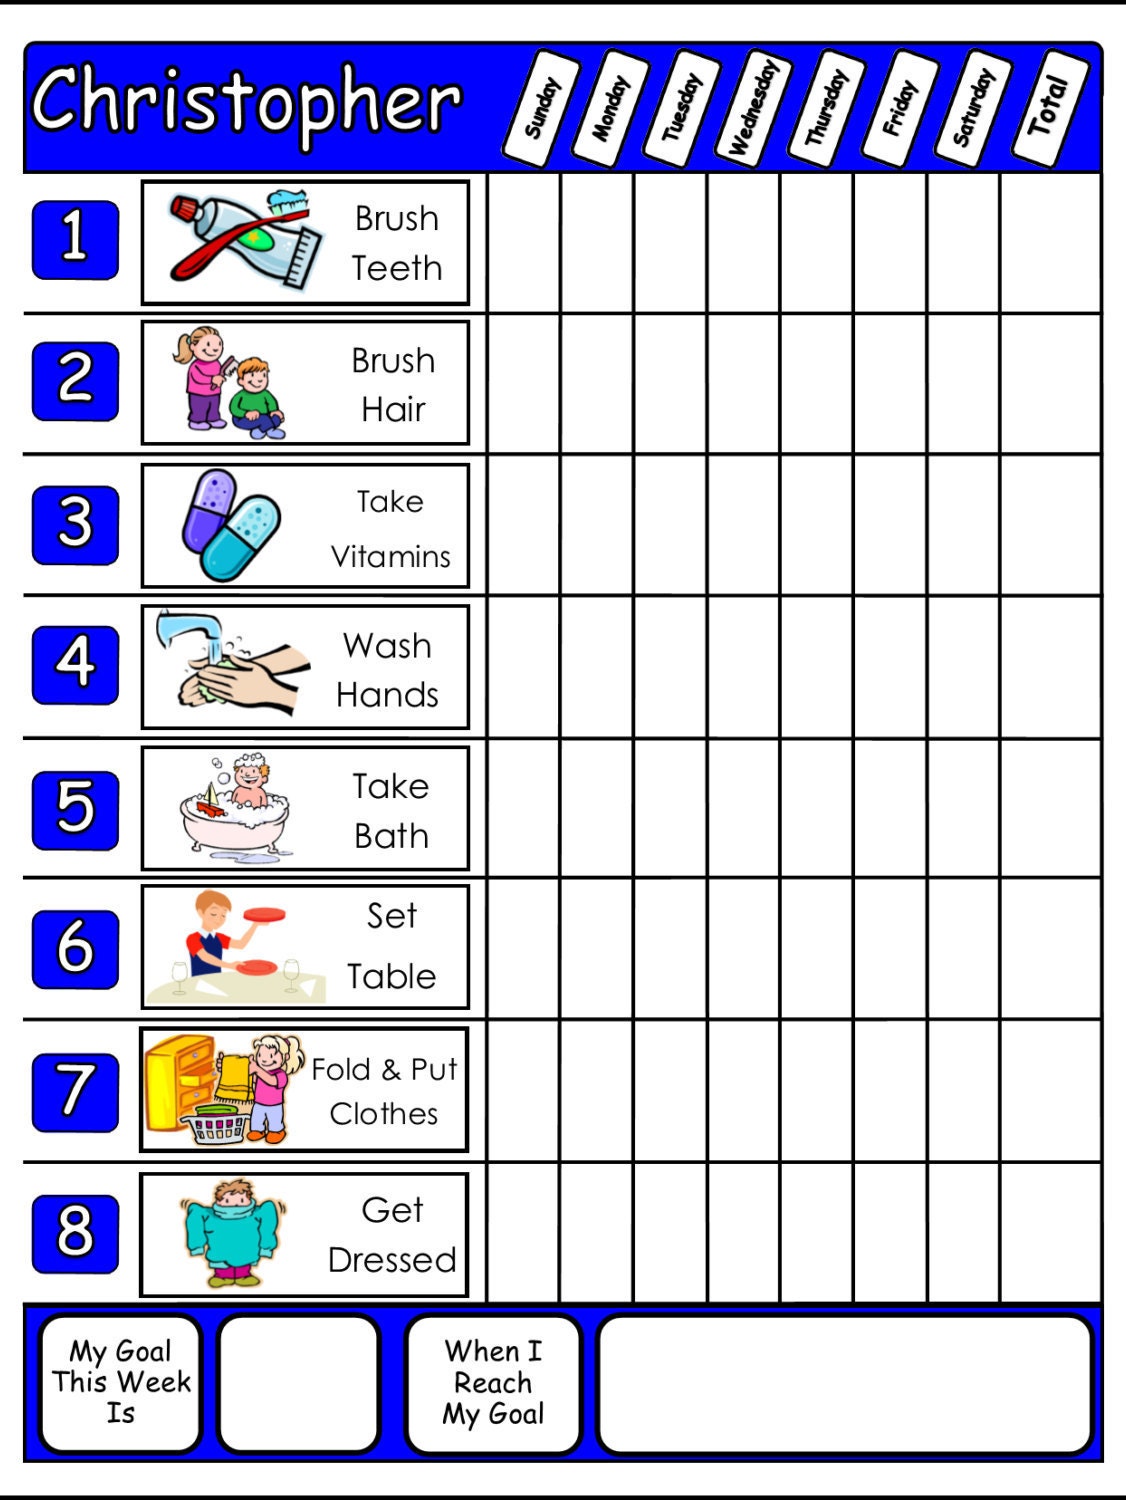 chore-chart-w-moveable-chores-for-multiple-kids-1-2-or-3